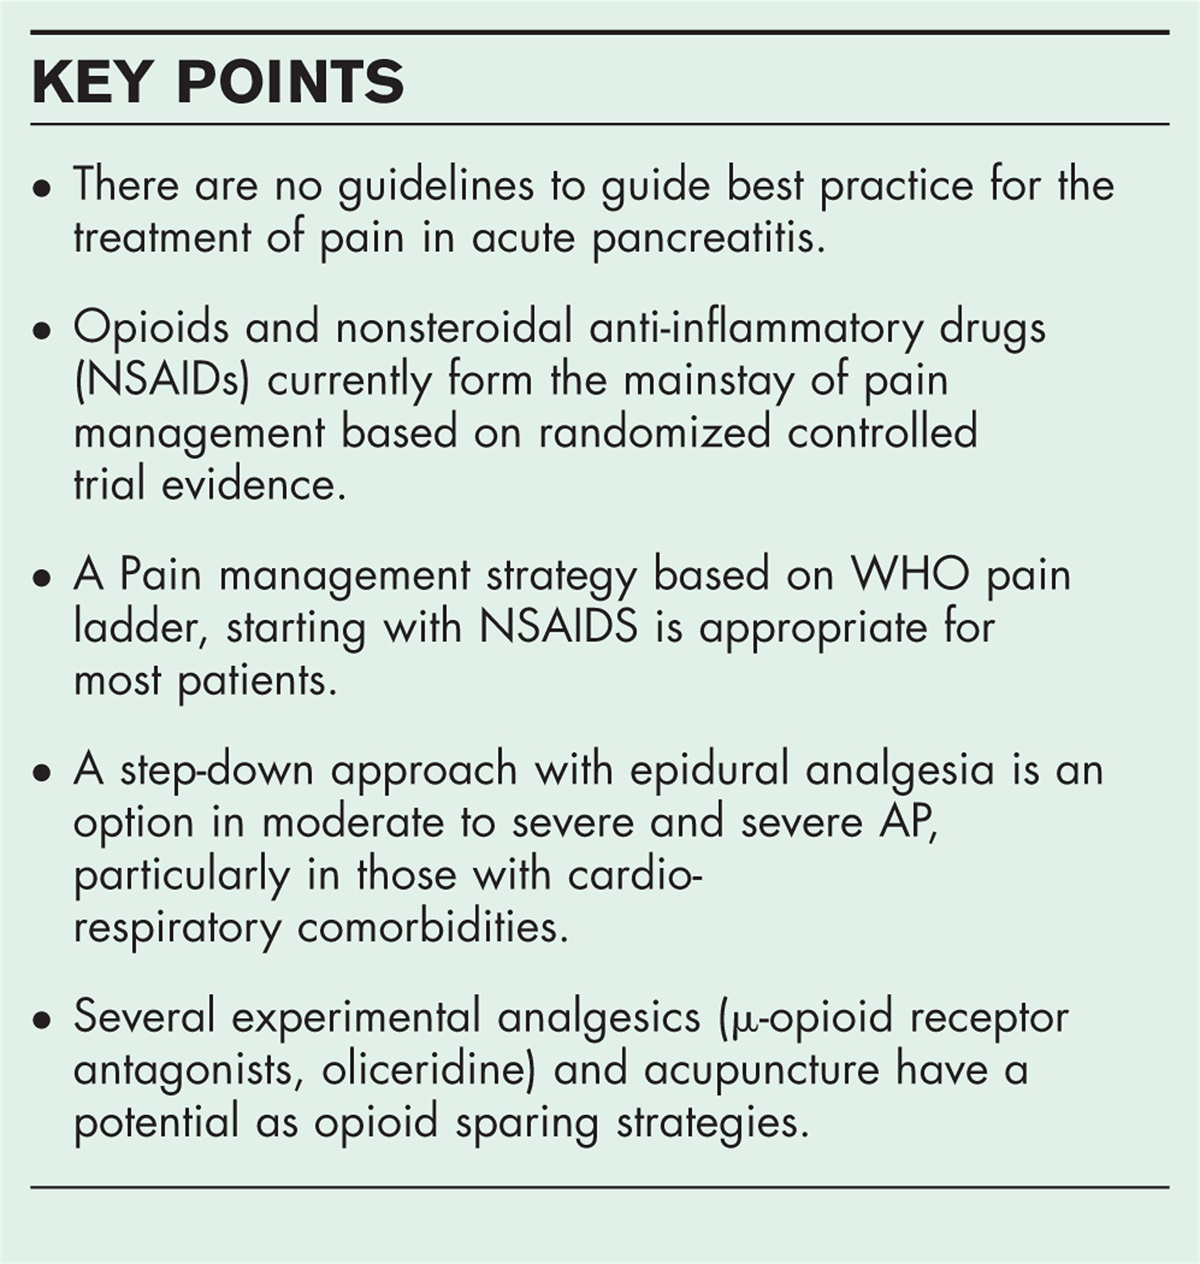 Update on pain management in acute pancreatitis